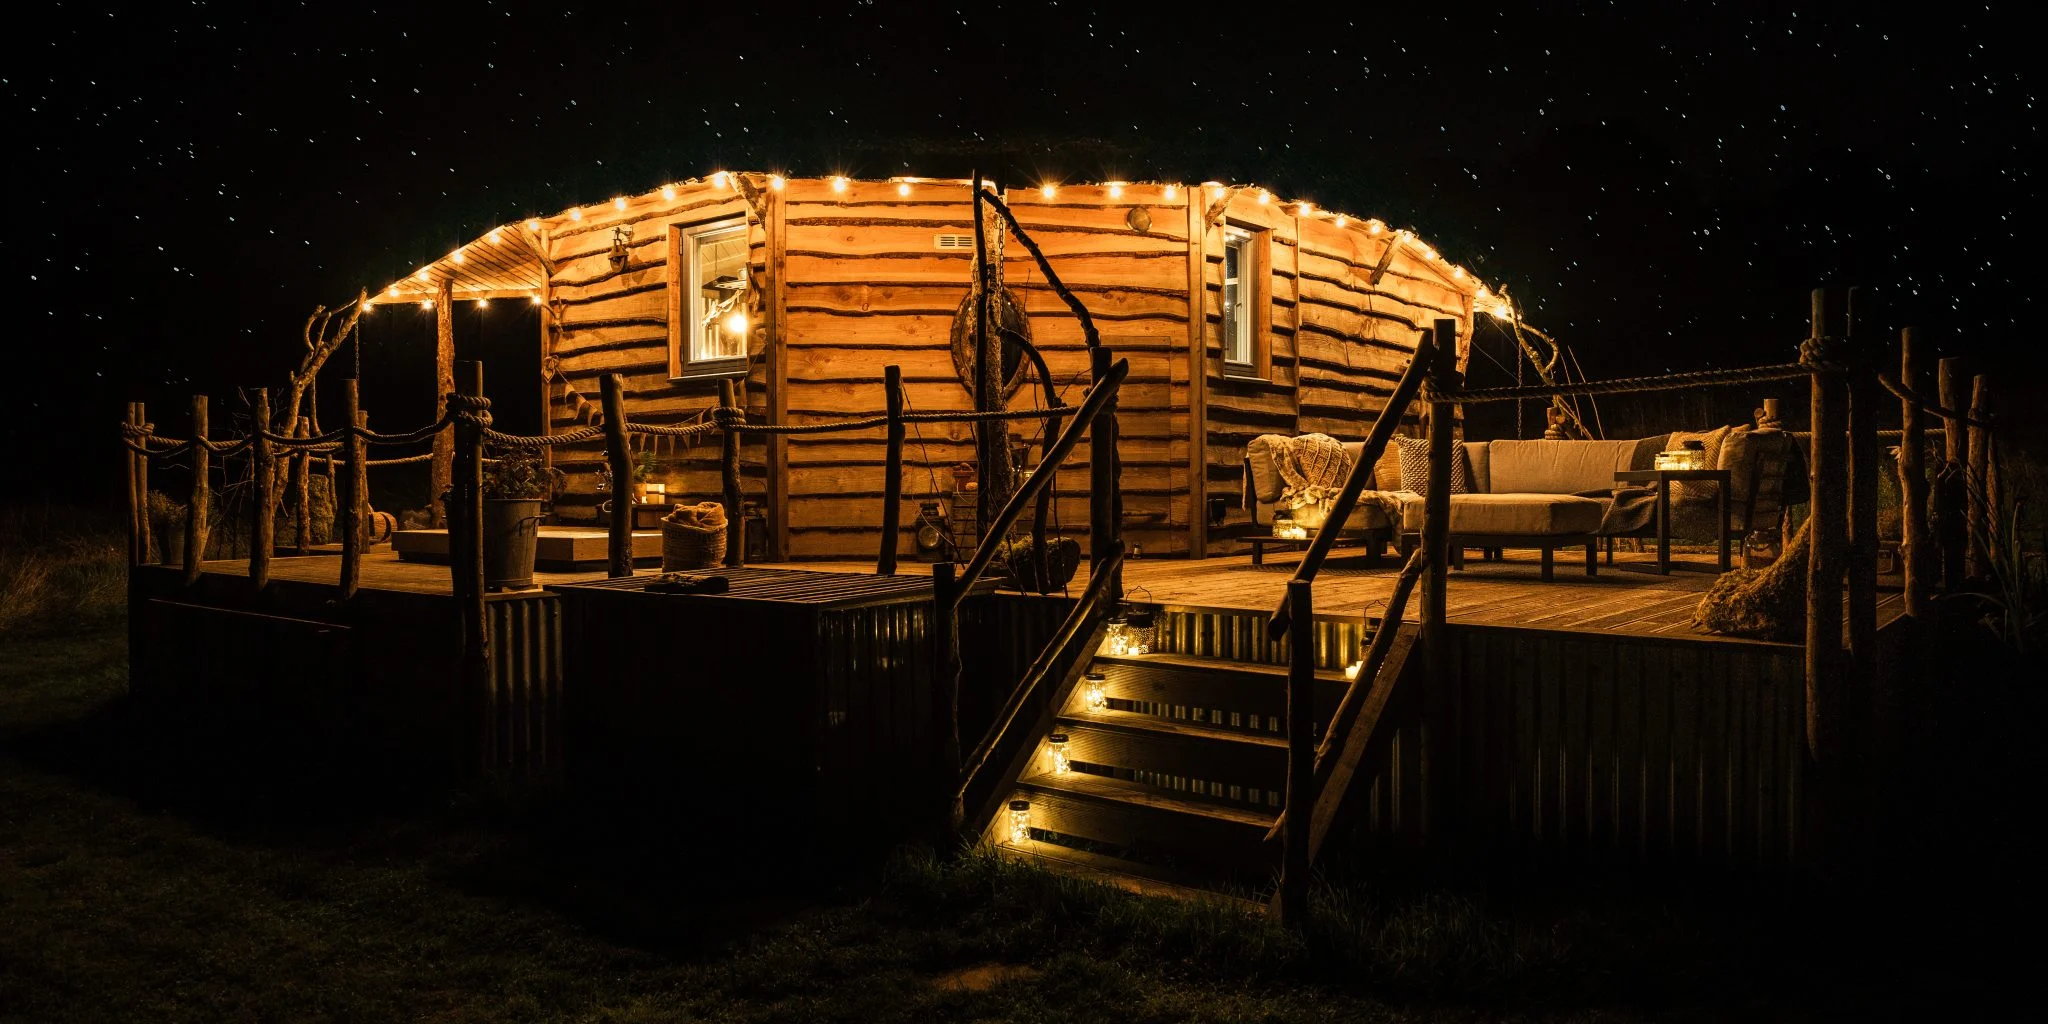 Starry nights at Erwain Escapes - Luxury Glamping Cabins with Hot Tubs - Brecon Beacons